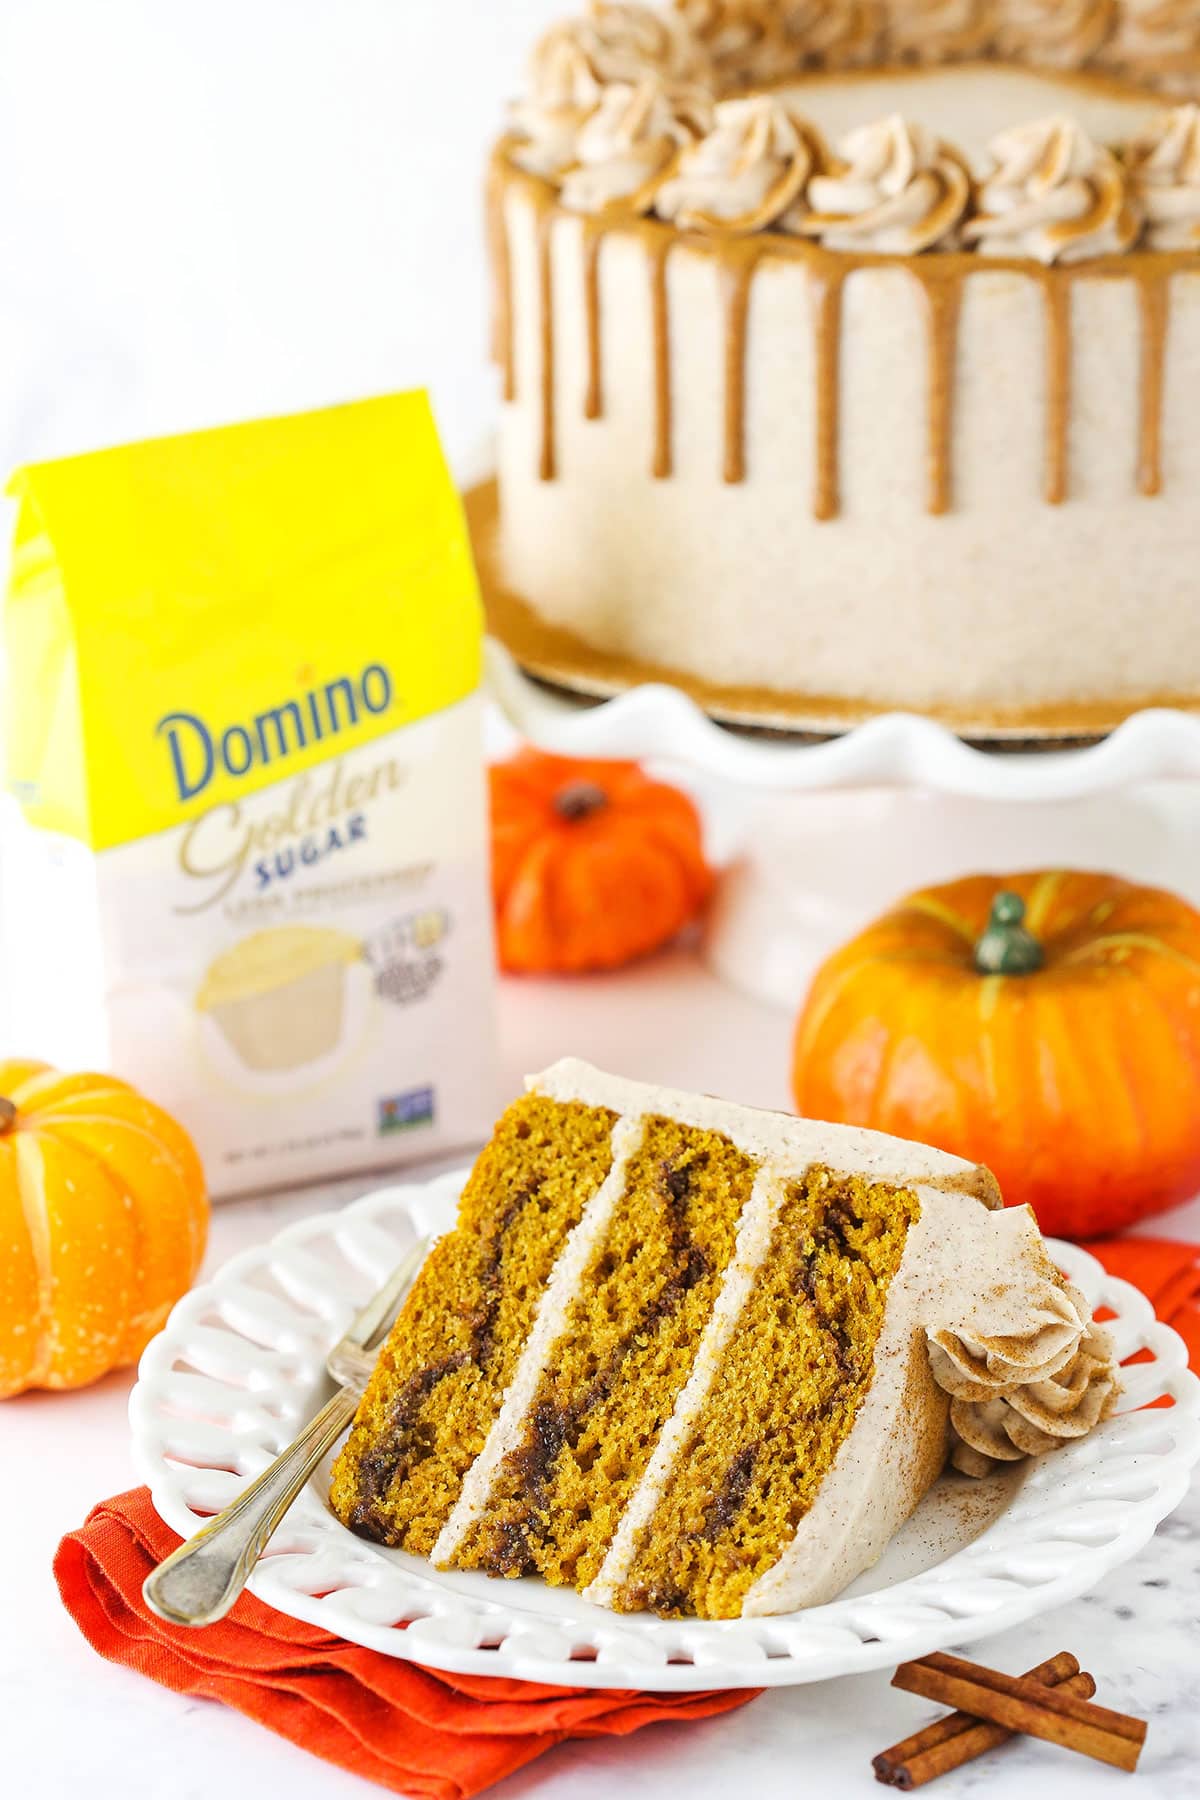 A slice of Cinnamon Sugar Swirl Pumpkin Layer Cake with cake and Domino golden sugar in the background